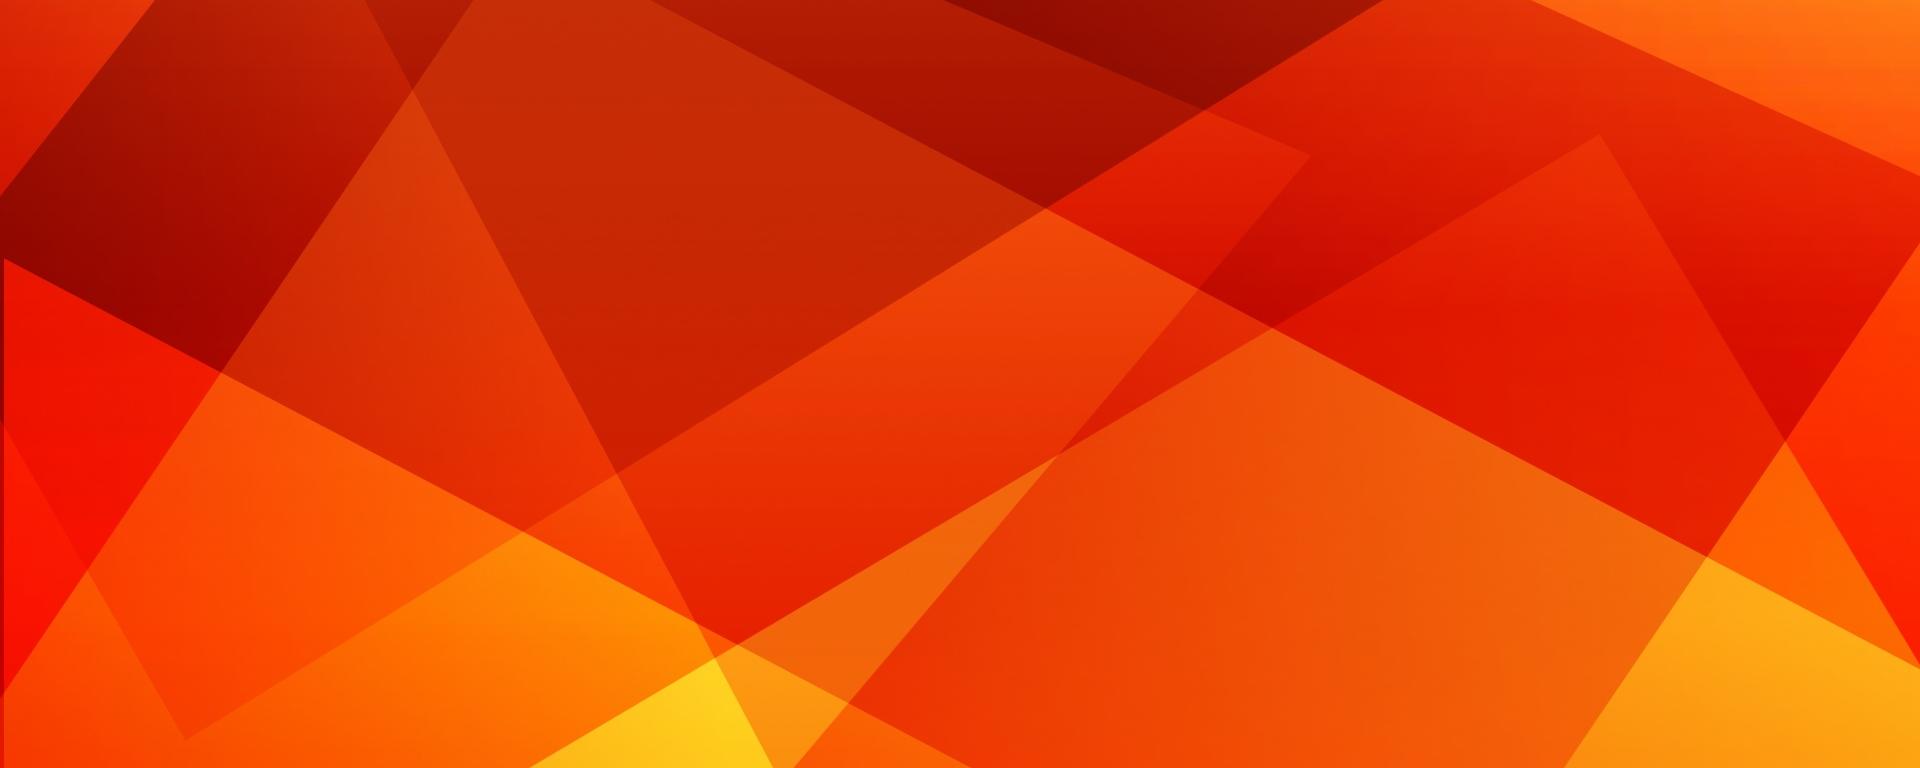 abstract red, yellow, and orange background